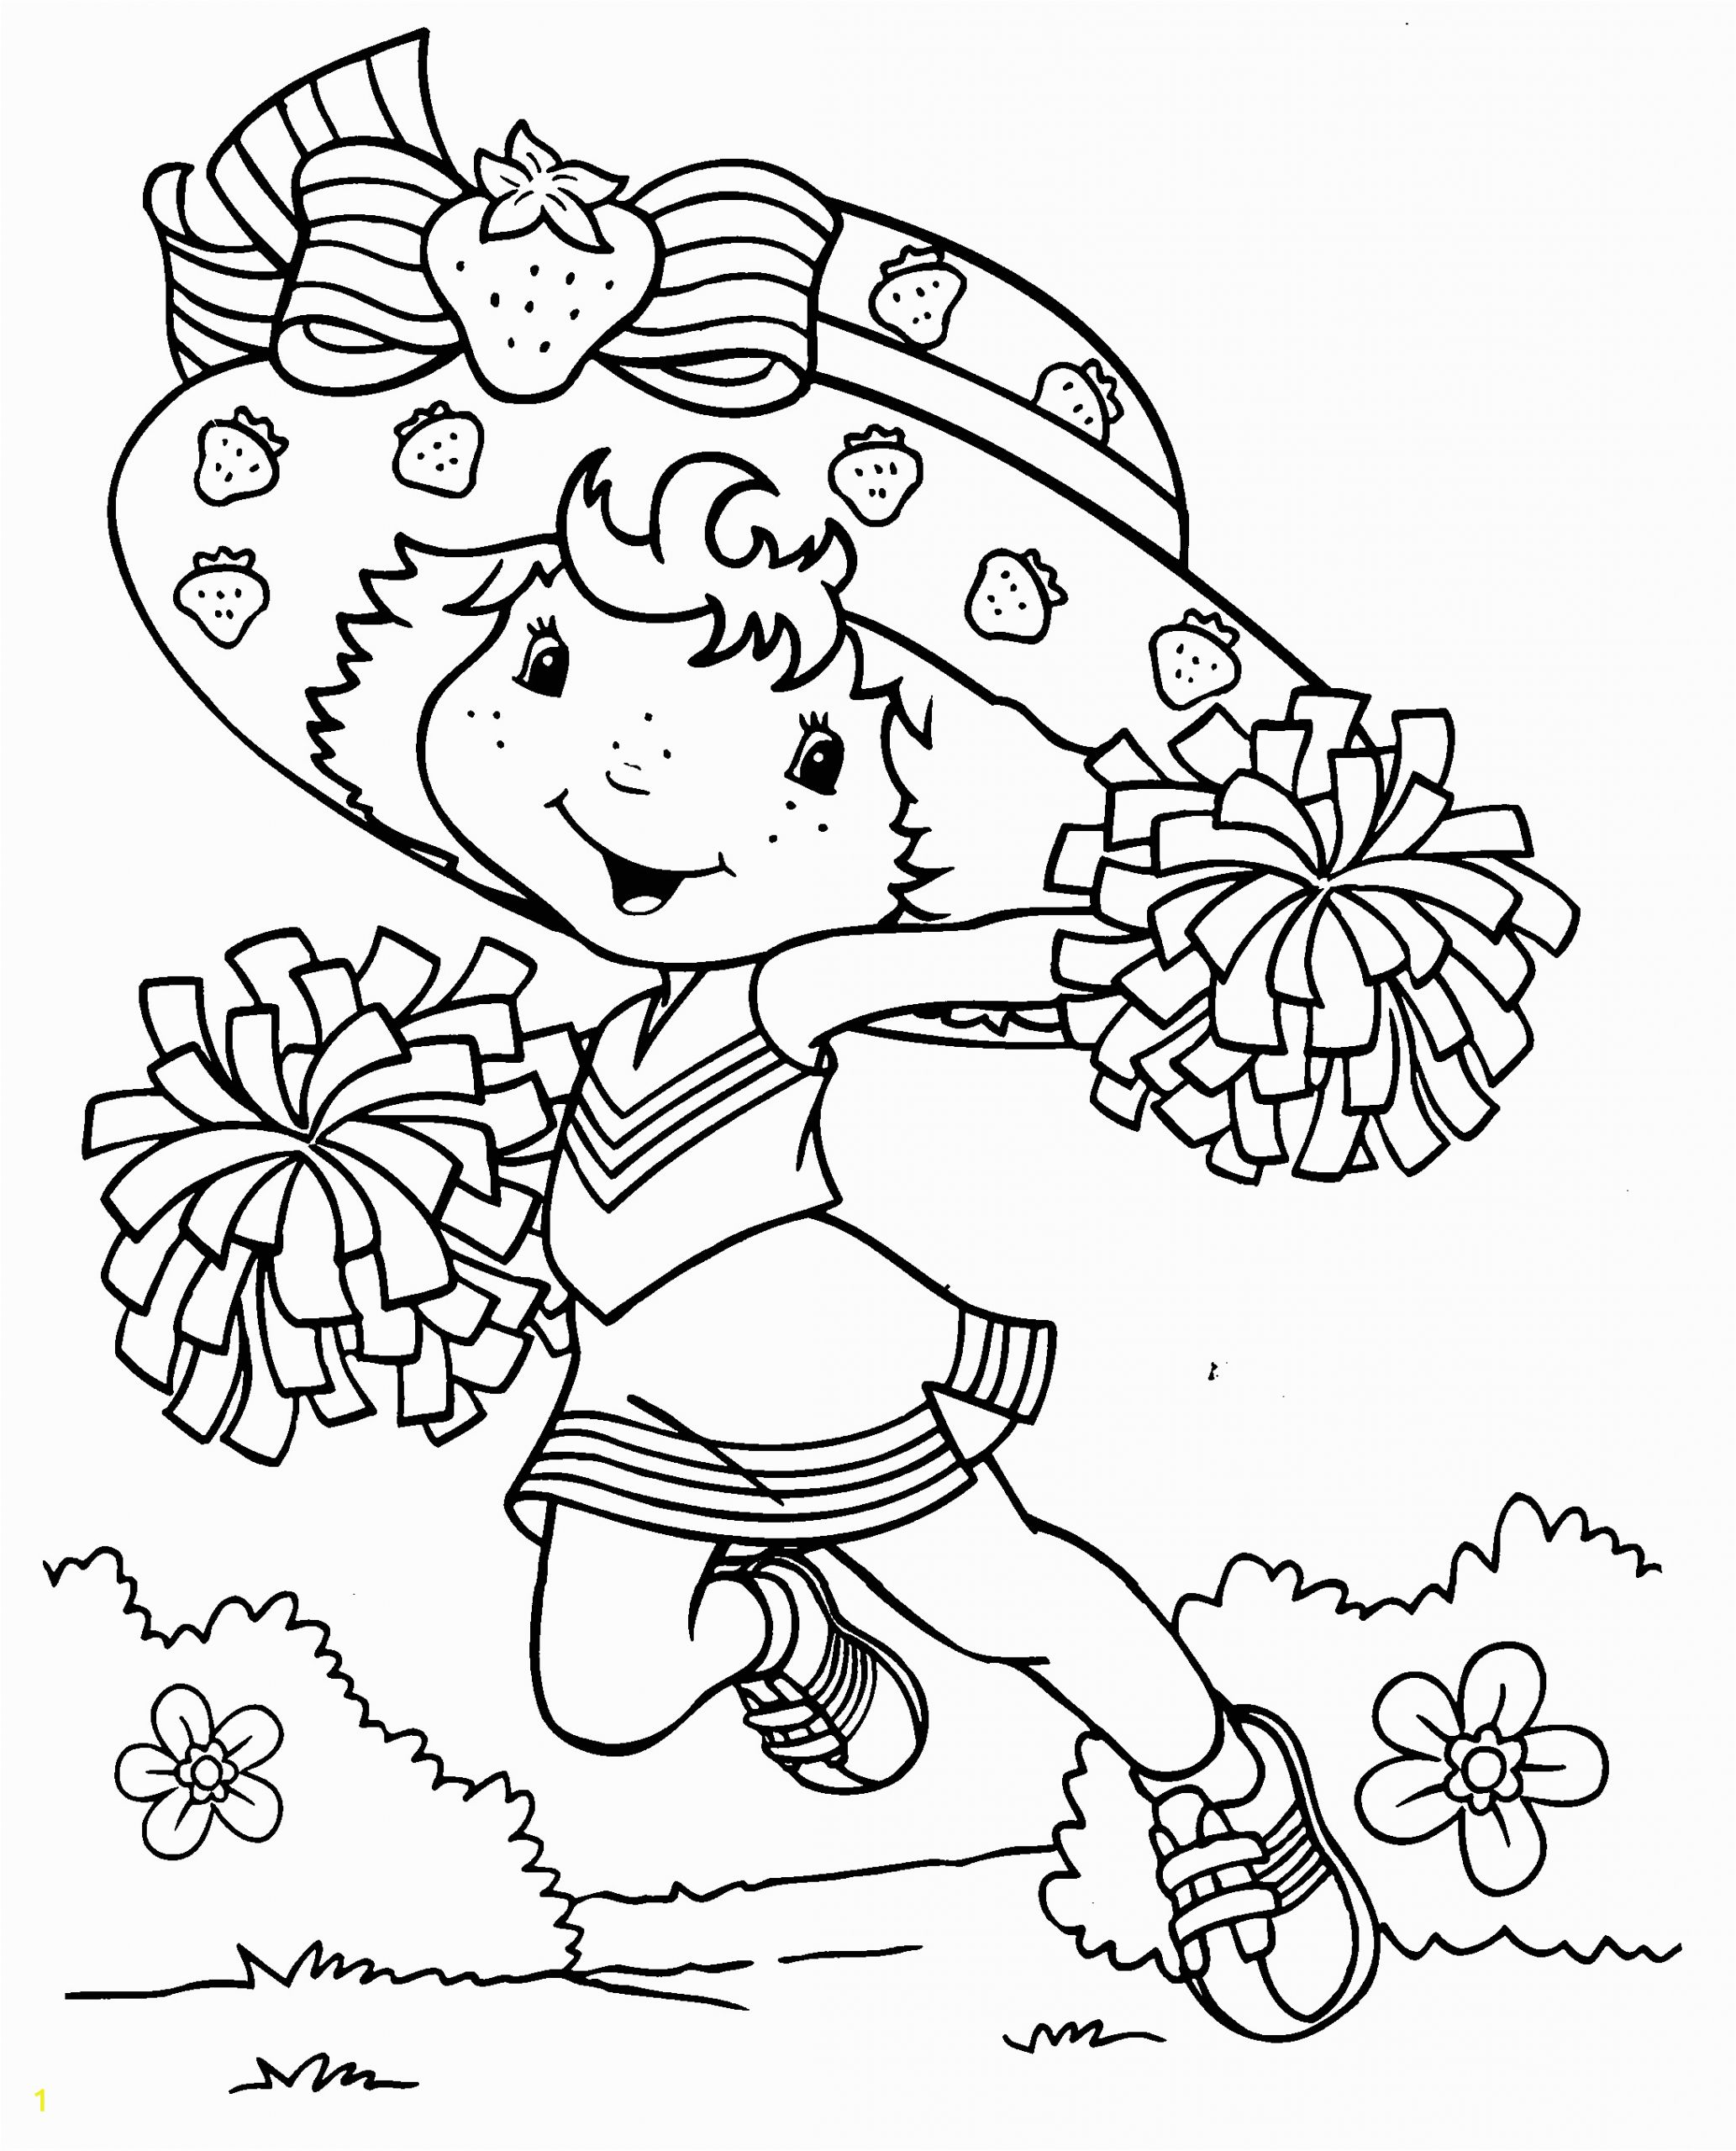 image=strawberry shortcake coloring pages for children strawberry shortcake 2